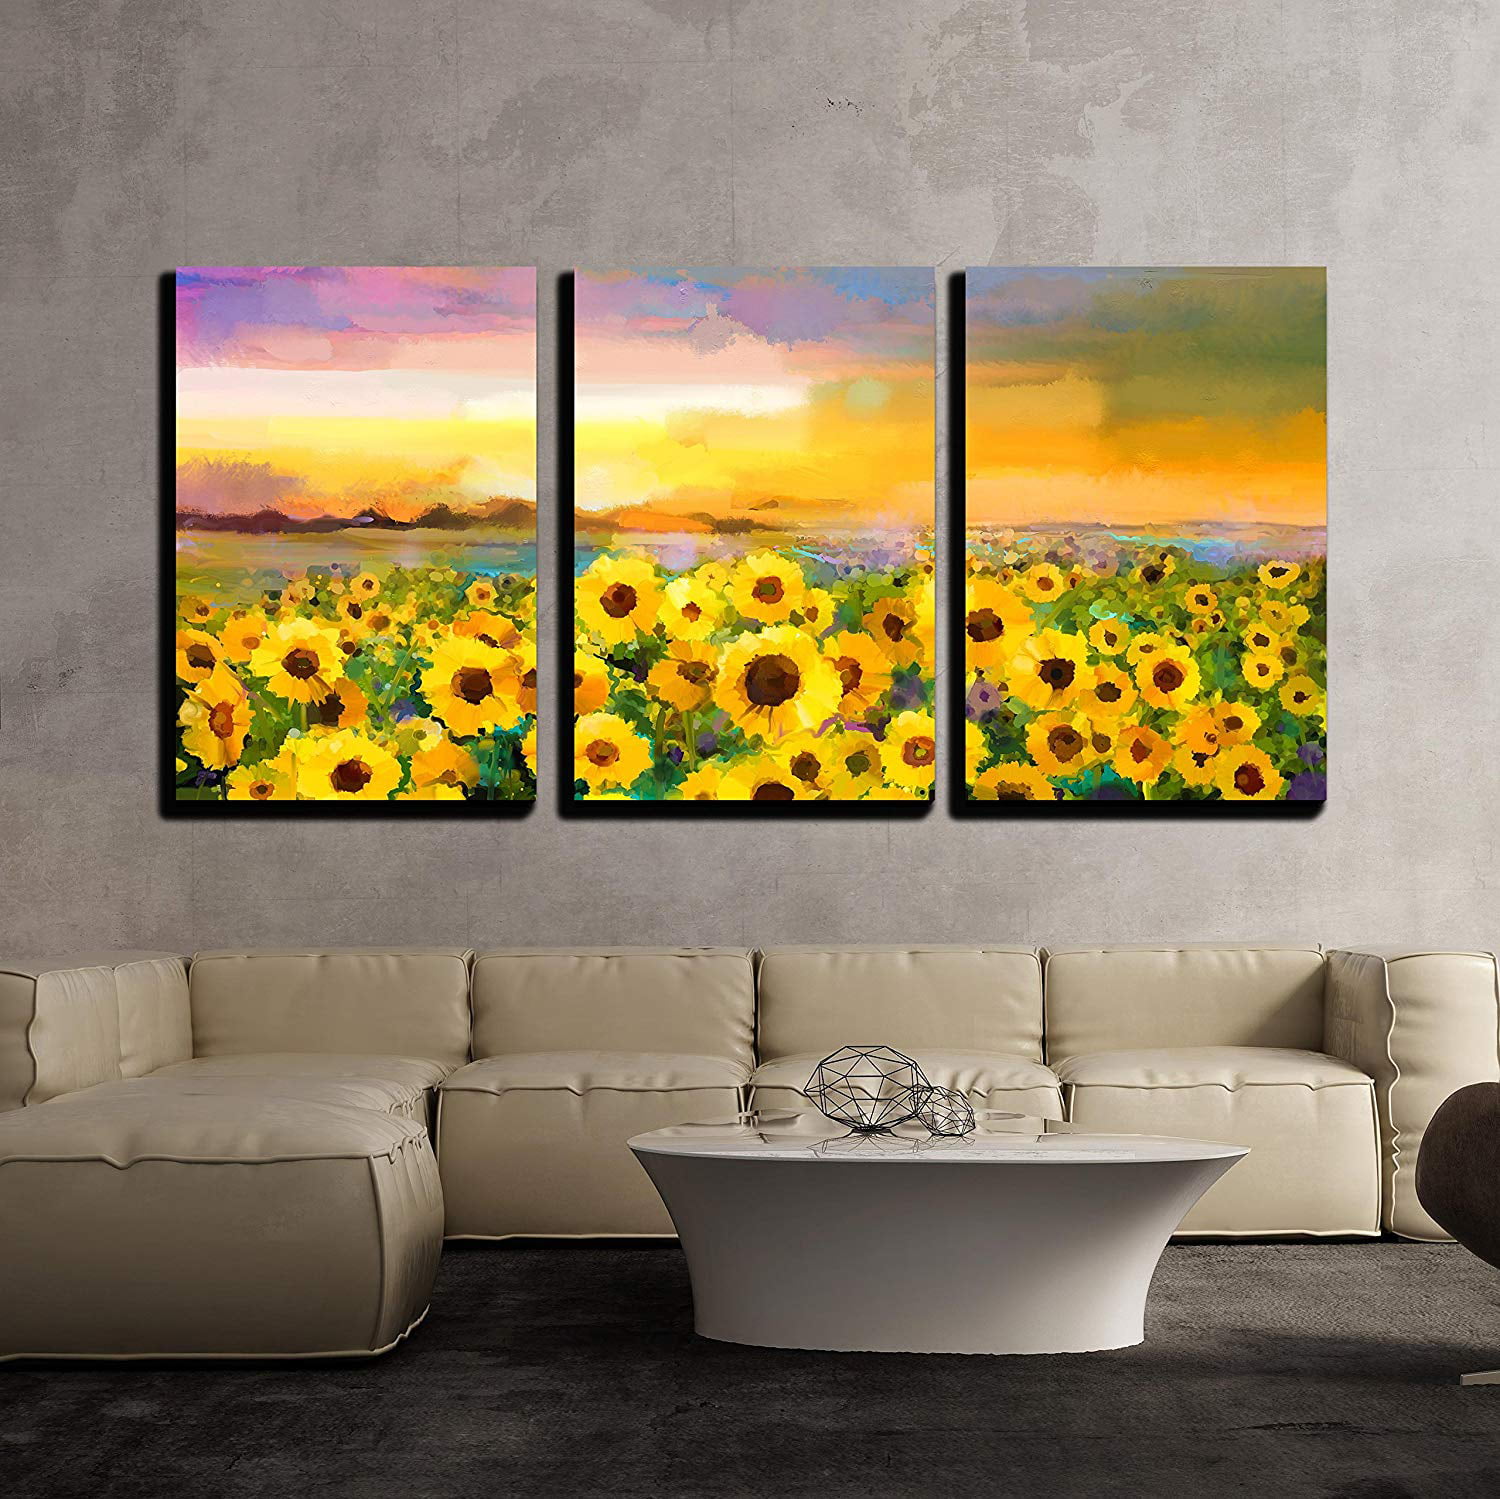 sunset landscape with a golden sunflower canvas print picture impressionism 